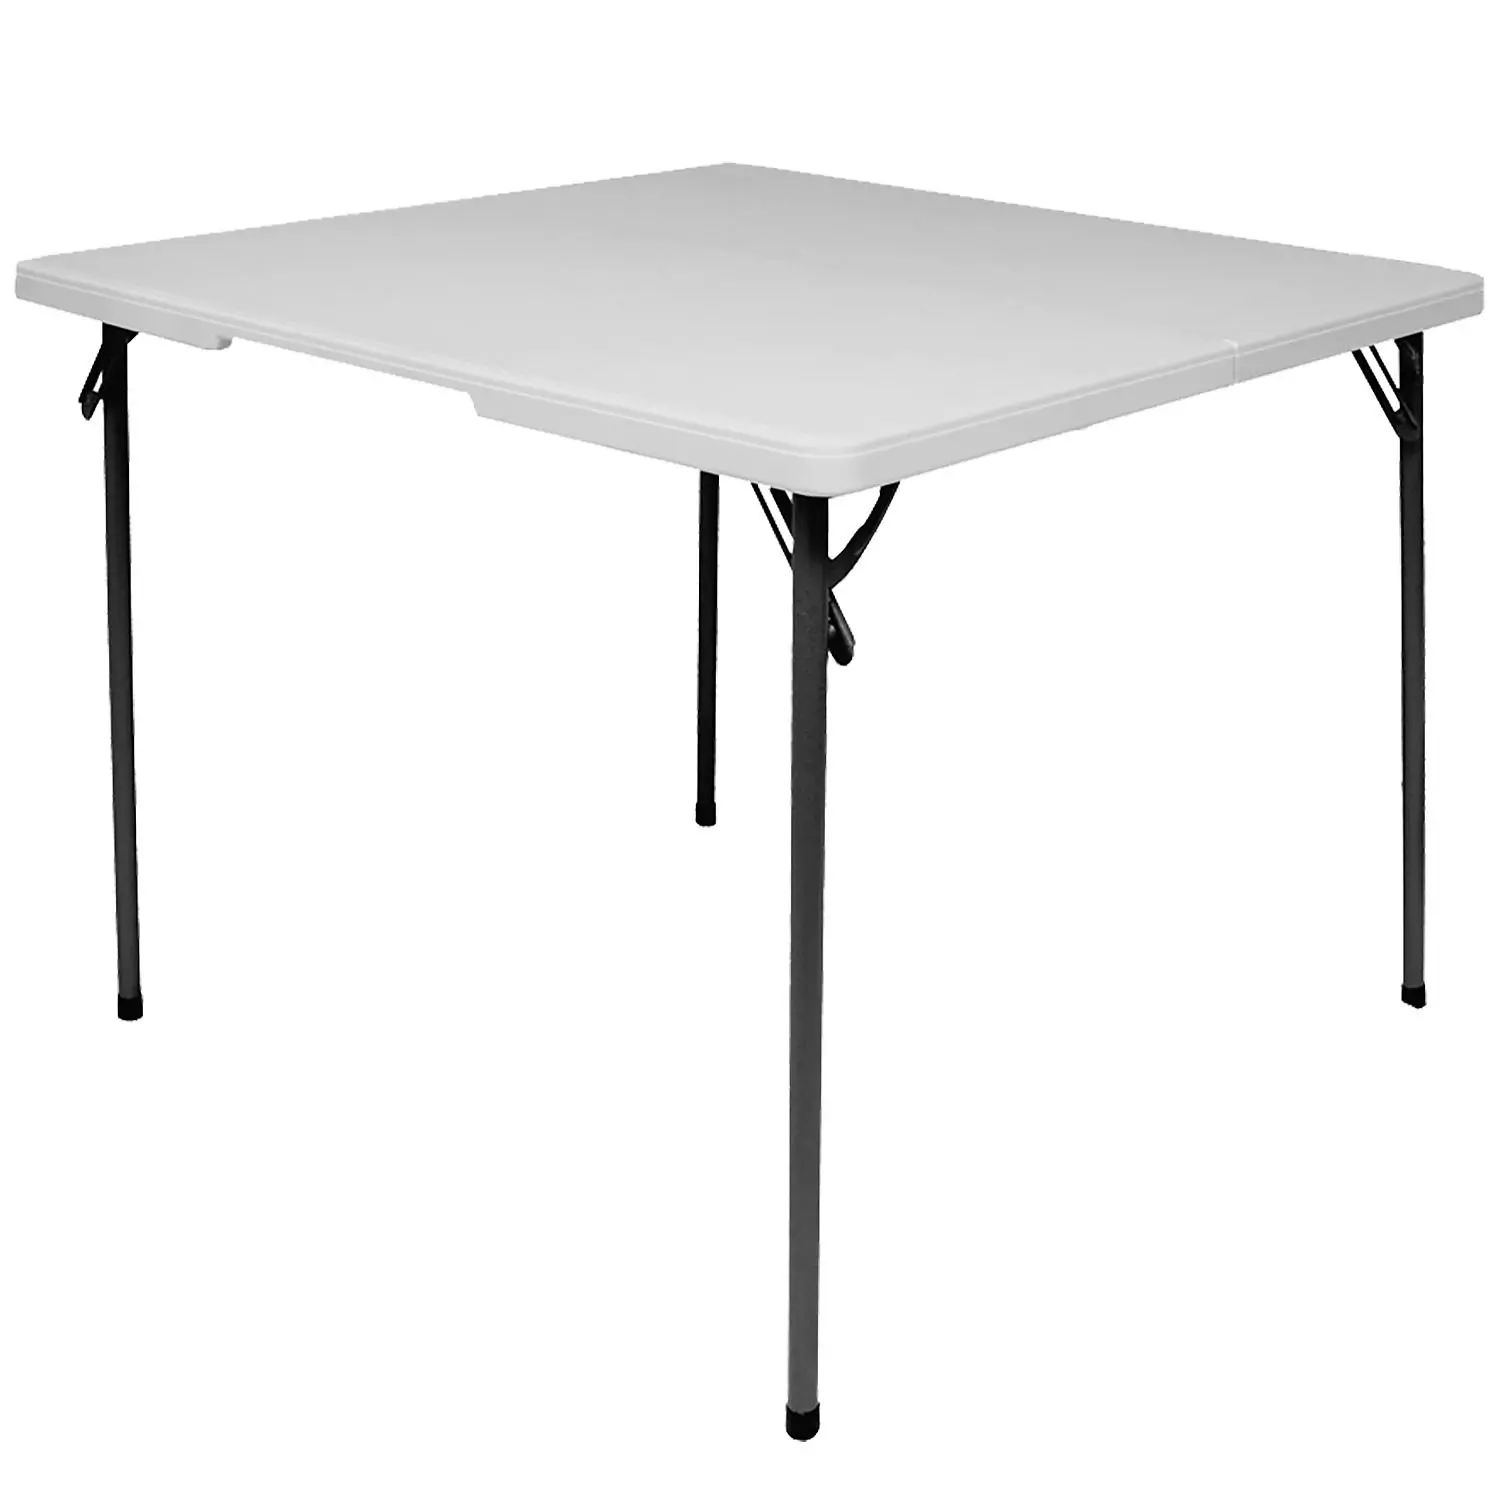 Heavy duty portable folding Plastic Table with handle, 35"